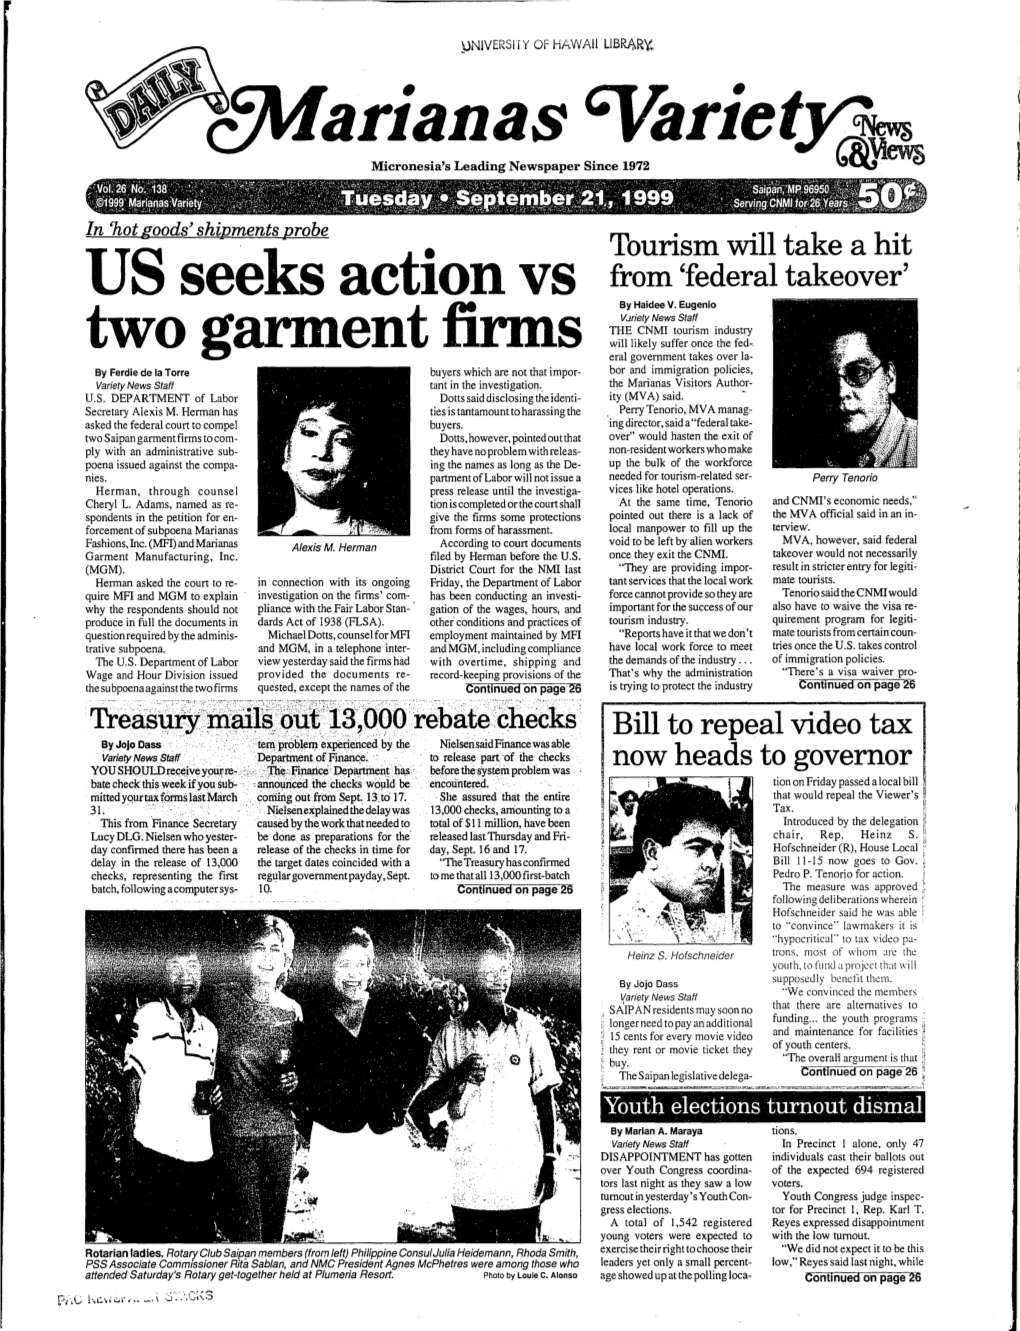 US Seeks Action Vs Two Garment Firms